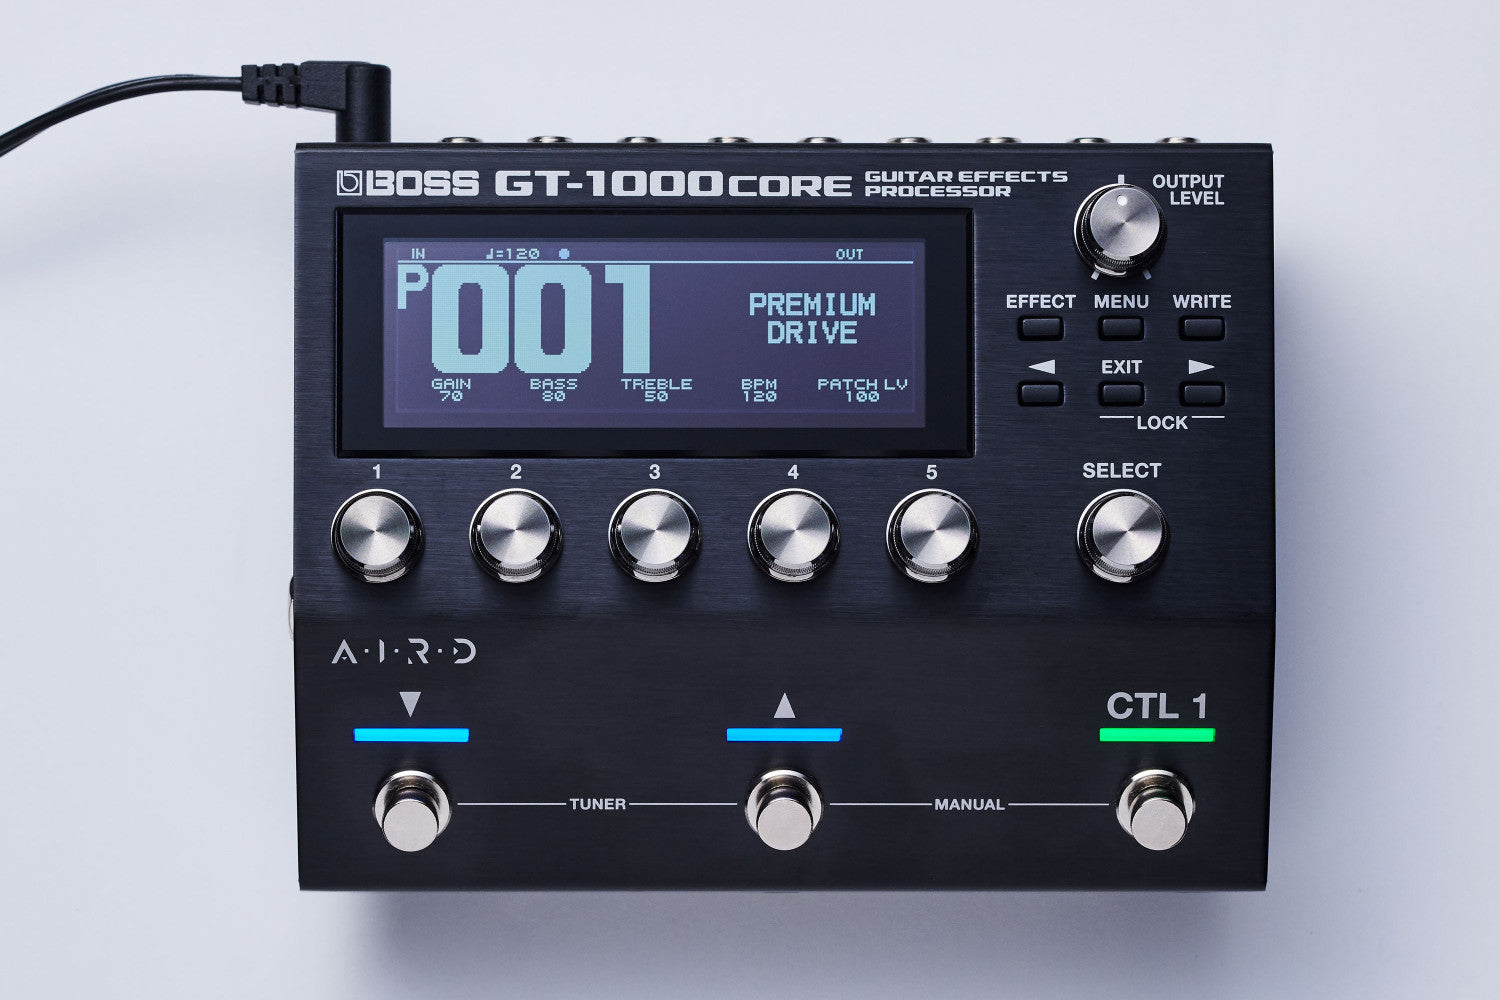 BOSS GT-1000CORE Guitar Effects Processor – Bananas at Large